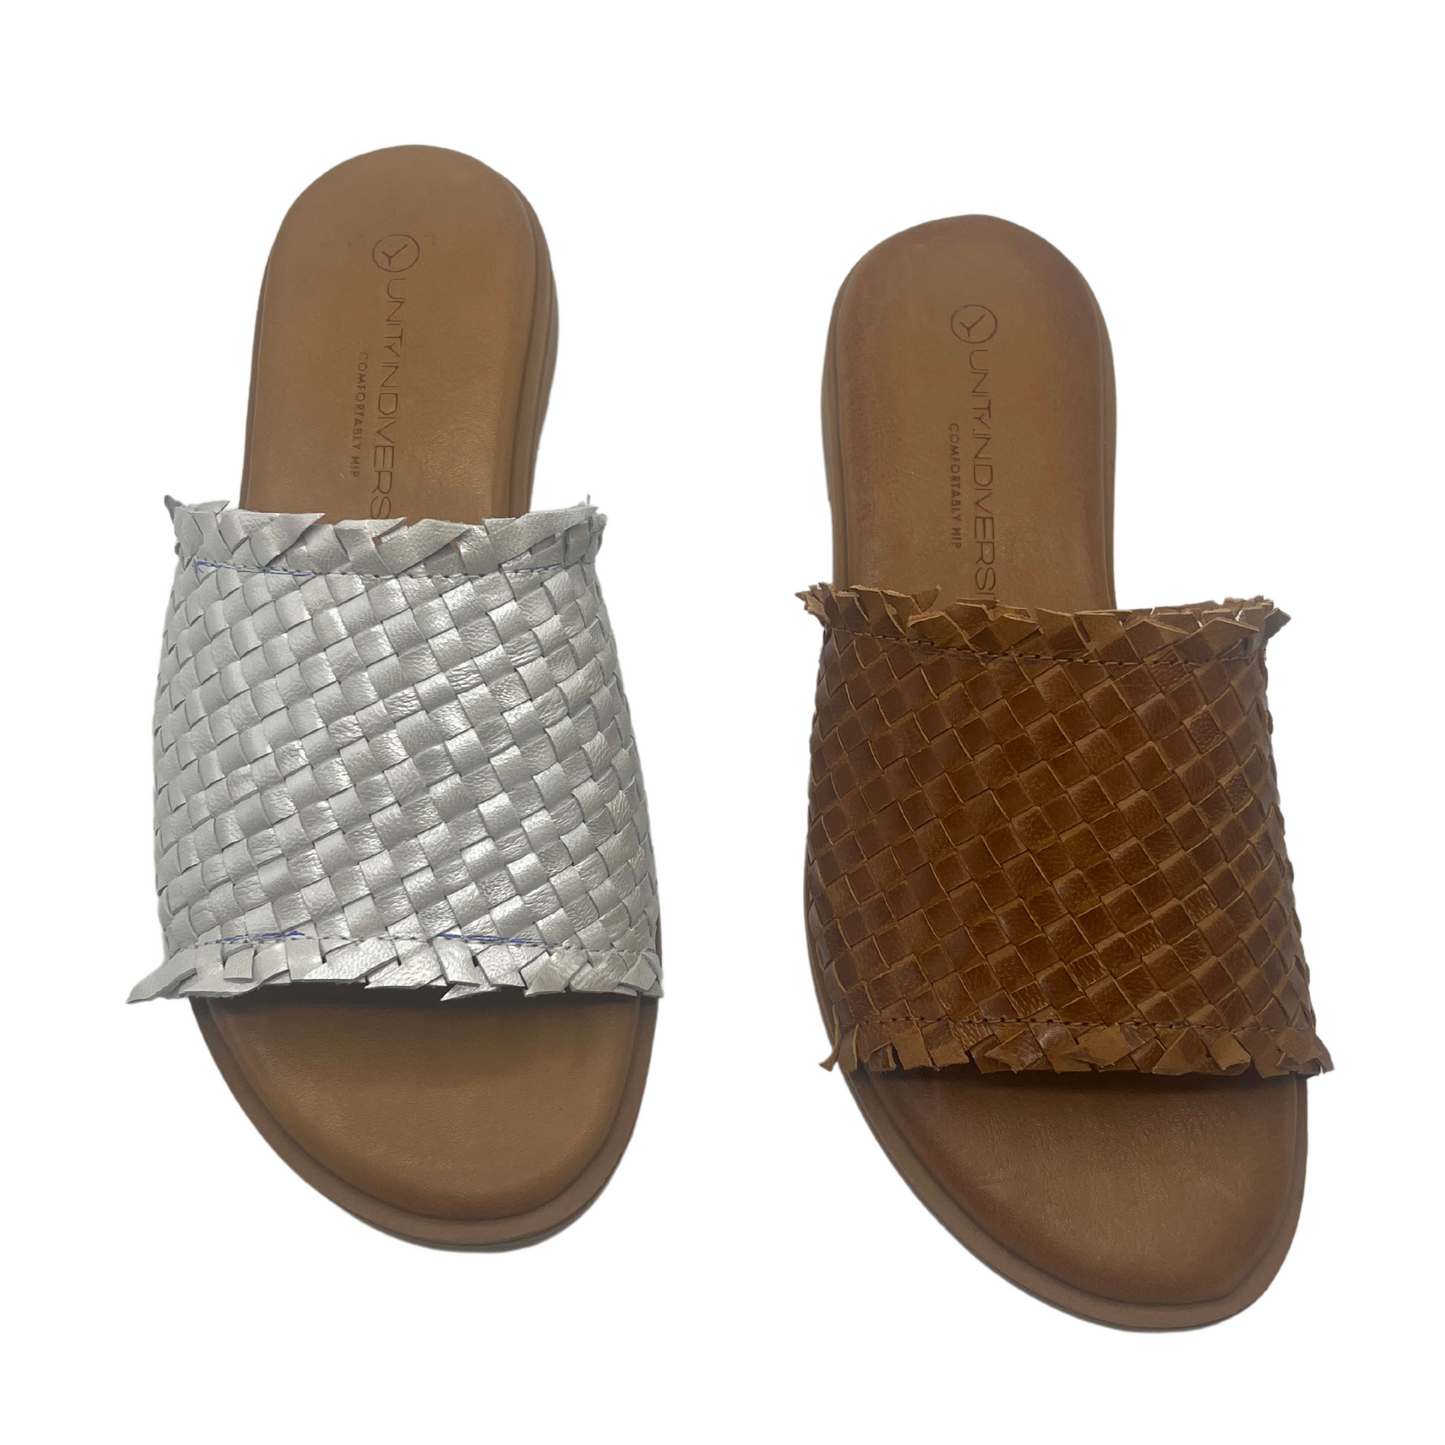 Top down view of two woven leather slip on sandals. The left one is silver and the right one is brown. Both have brown leather footbeds.